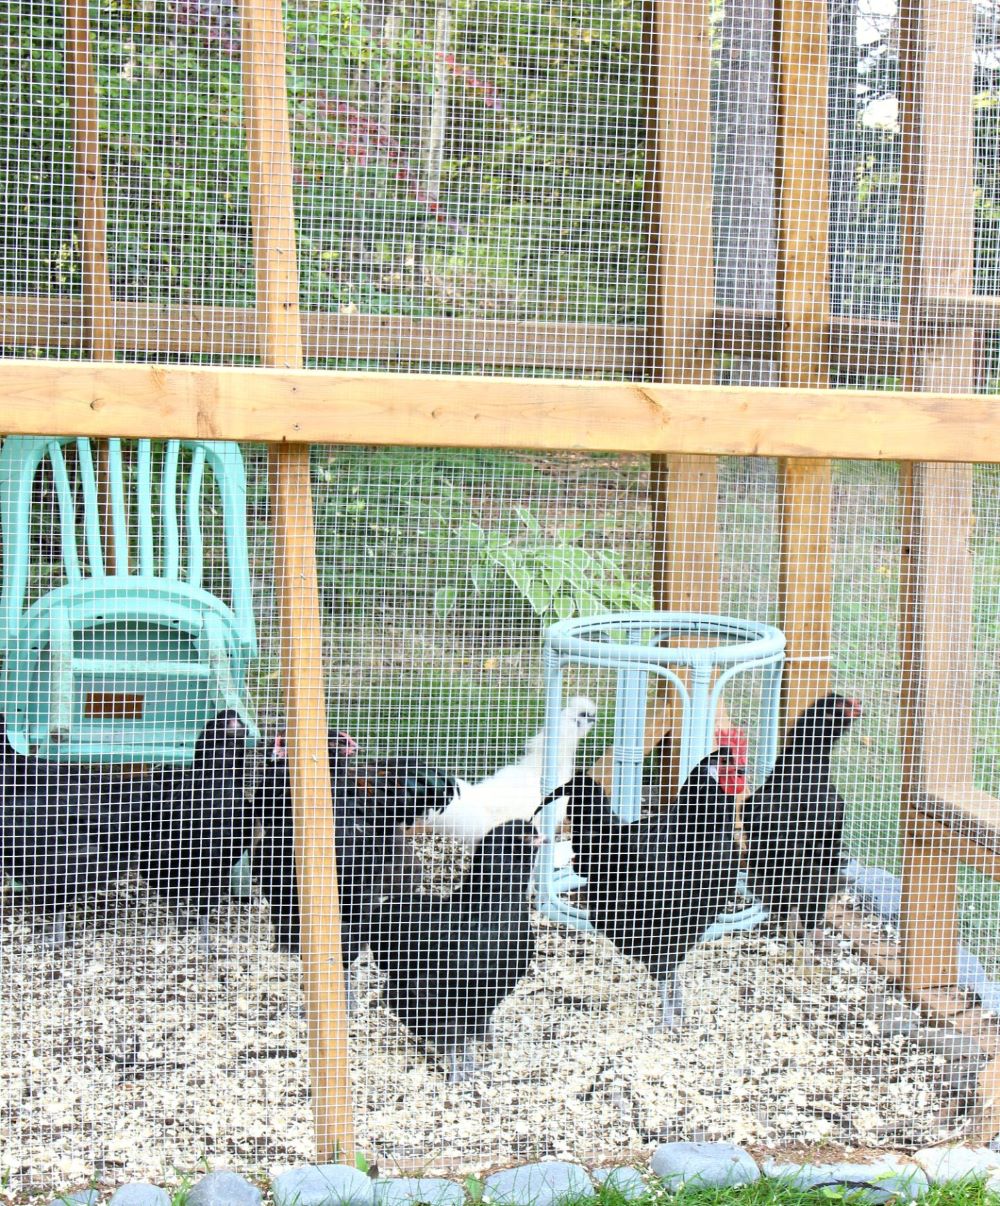 Chicken Run for Small Spaces